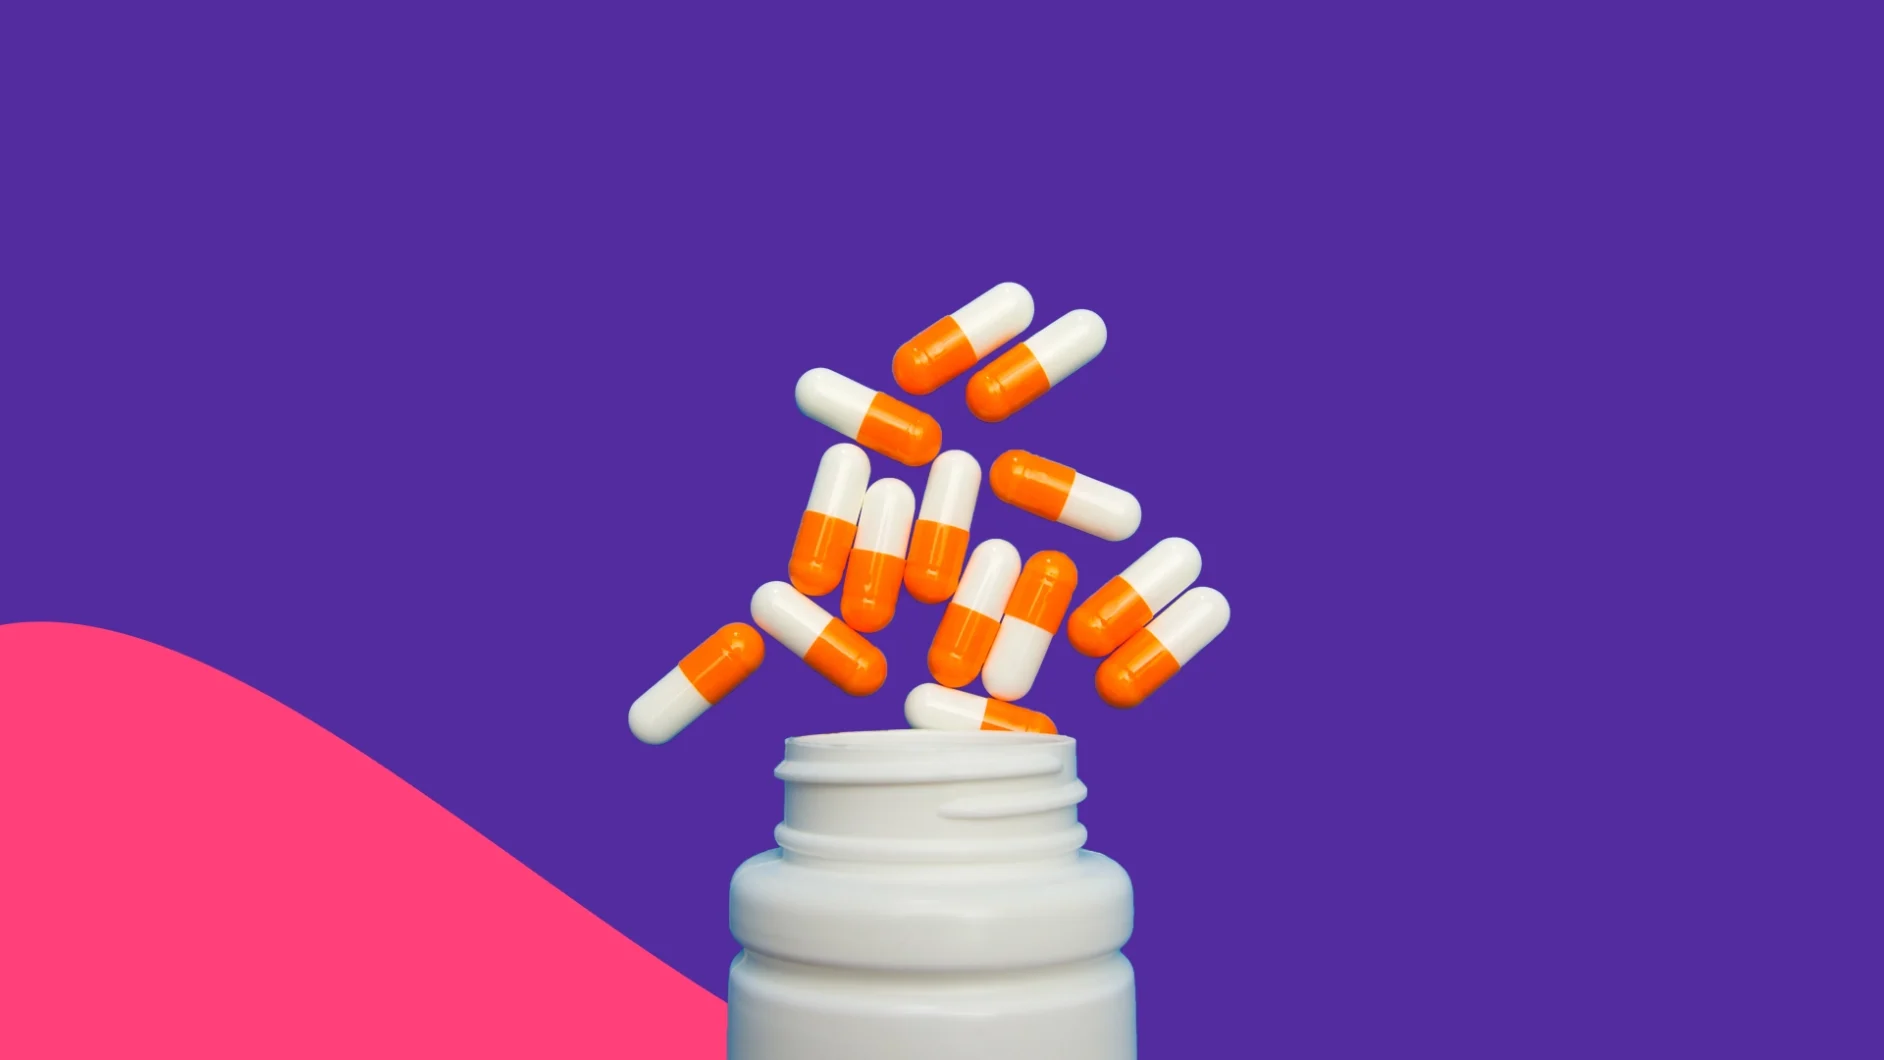 Bottle with pills spilling out - Is amoxicillin good for a UTI?